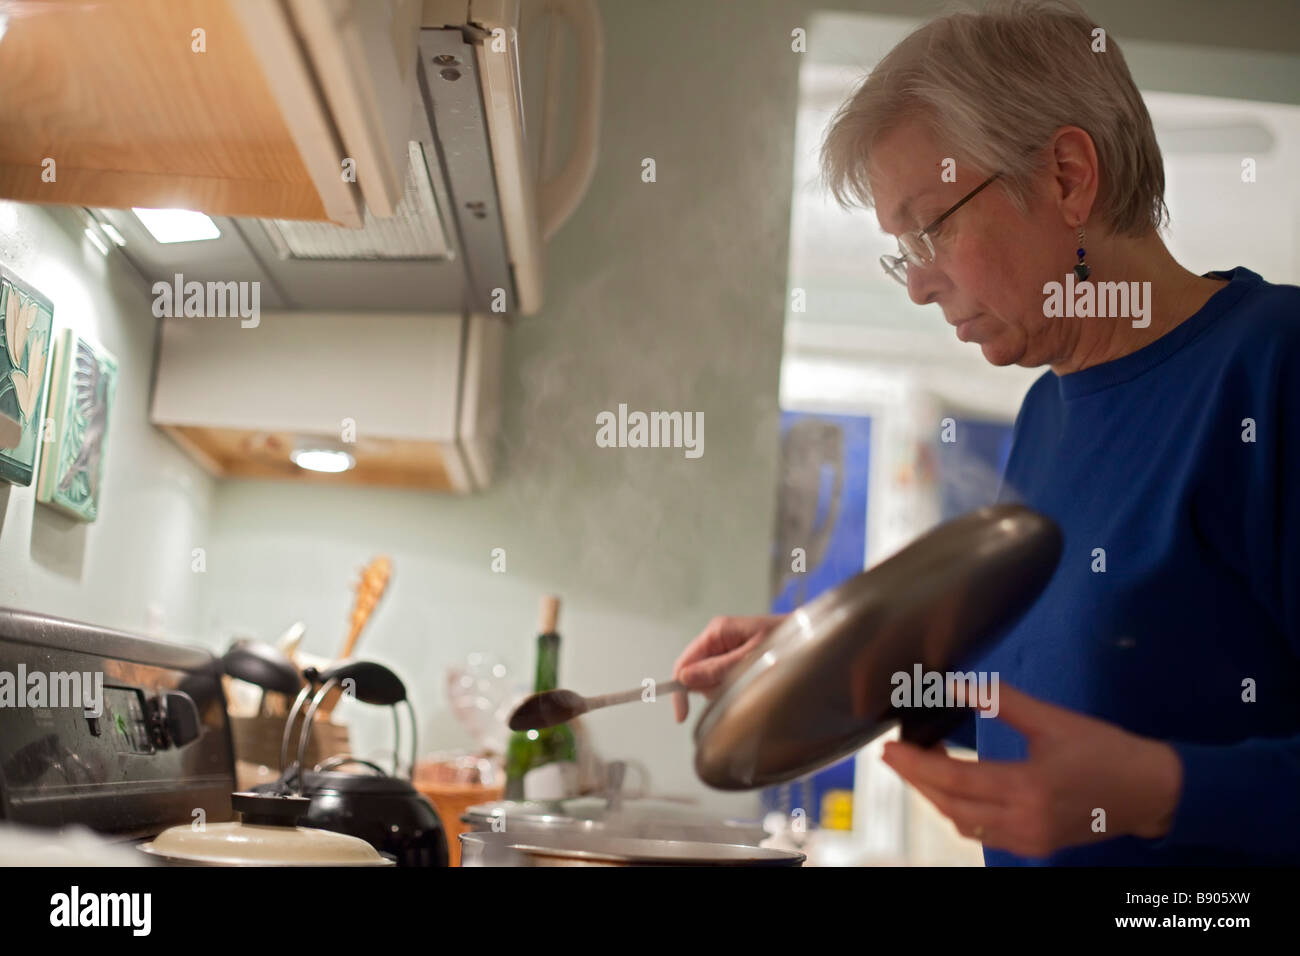 Susan Newell 60 cooks in her kitchen Stock Photo